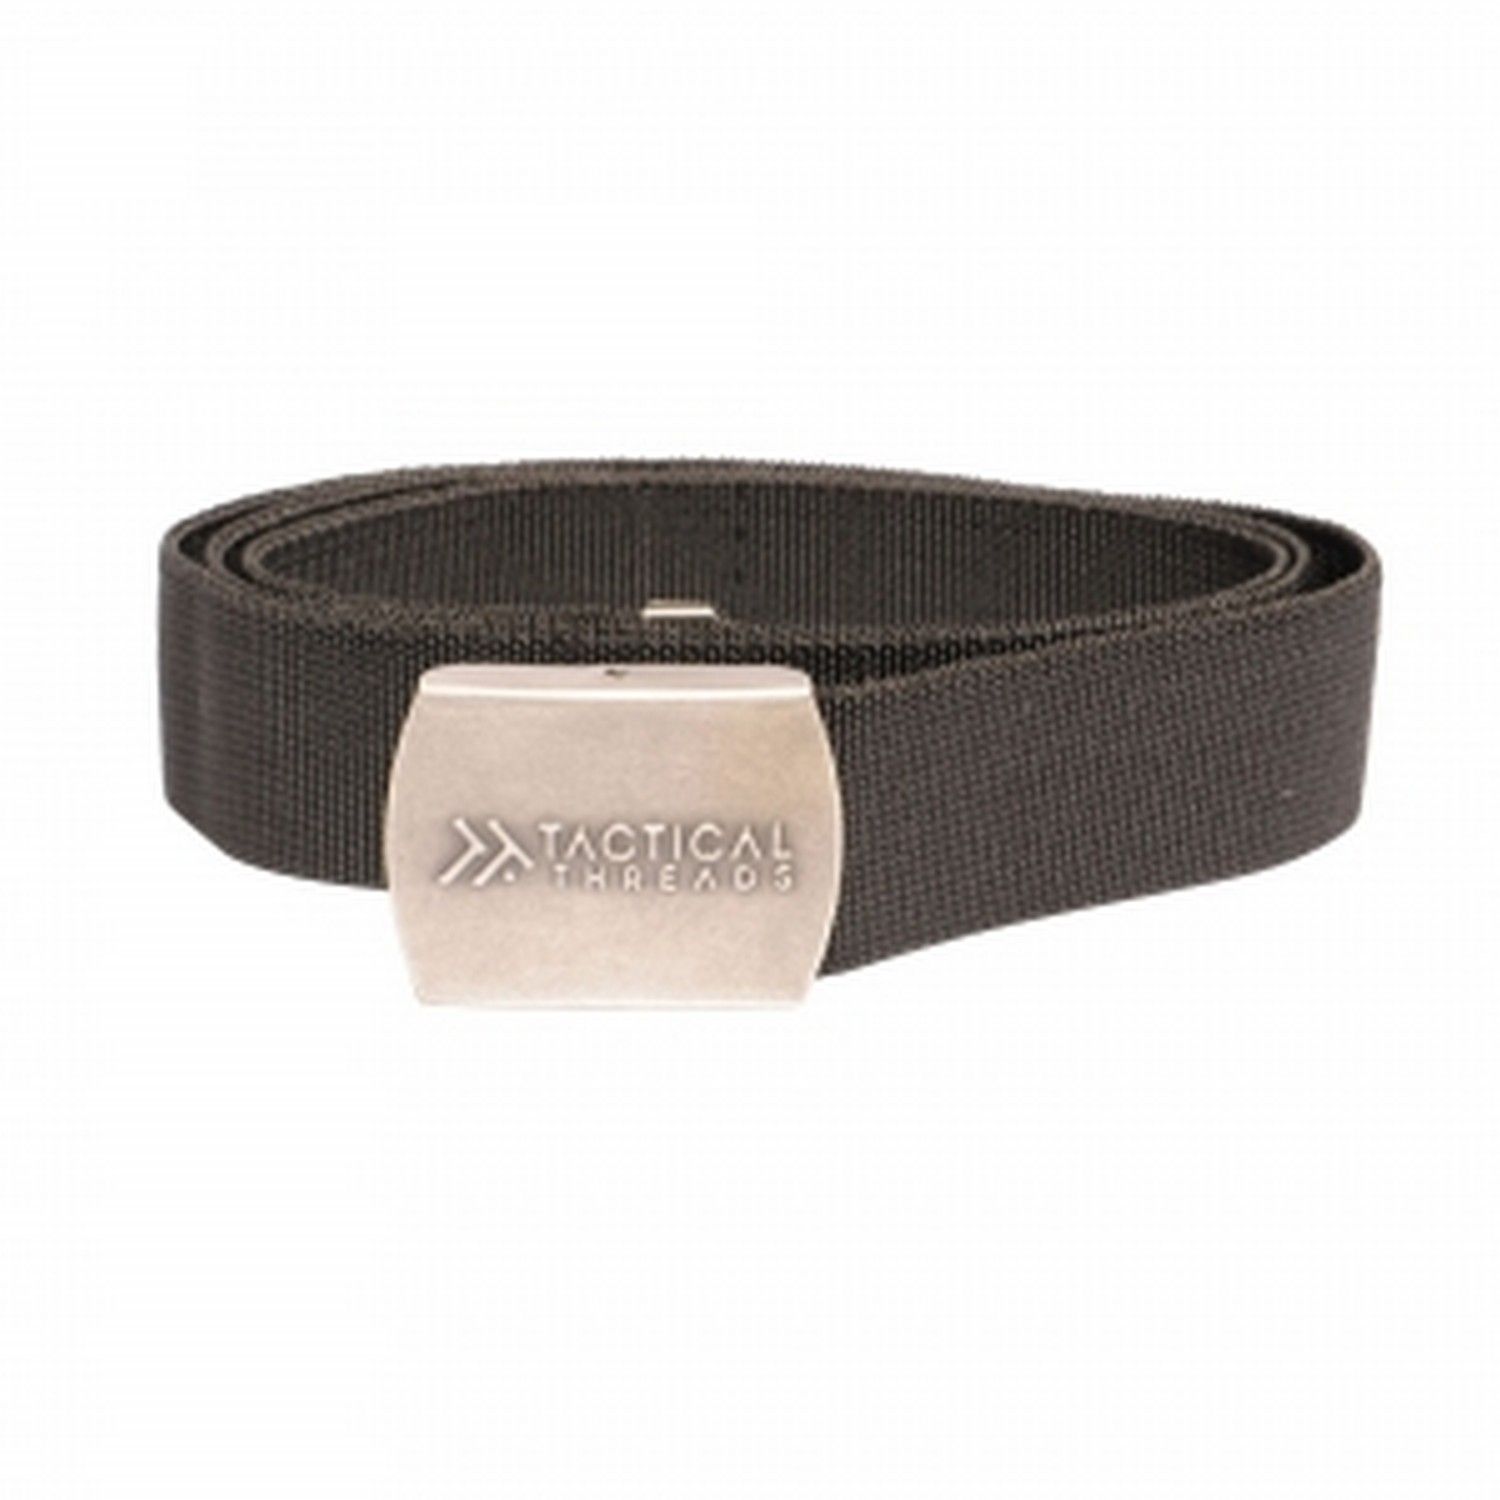 100% Polyester. Stretch belt for maximum comfort. Fully adjustable. Lightweight and durable. Regatta branded snap lock buckle.